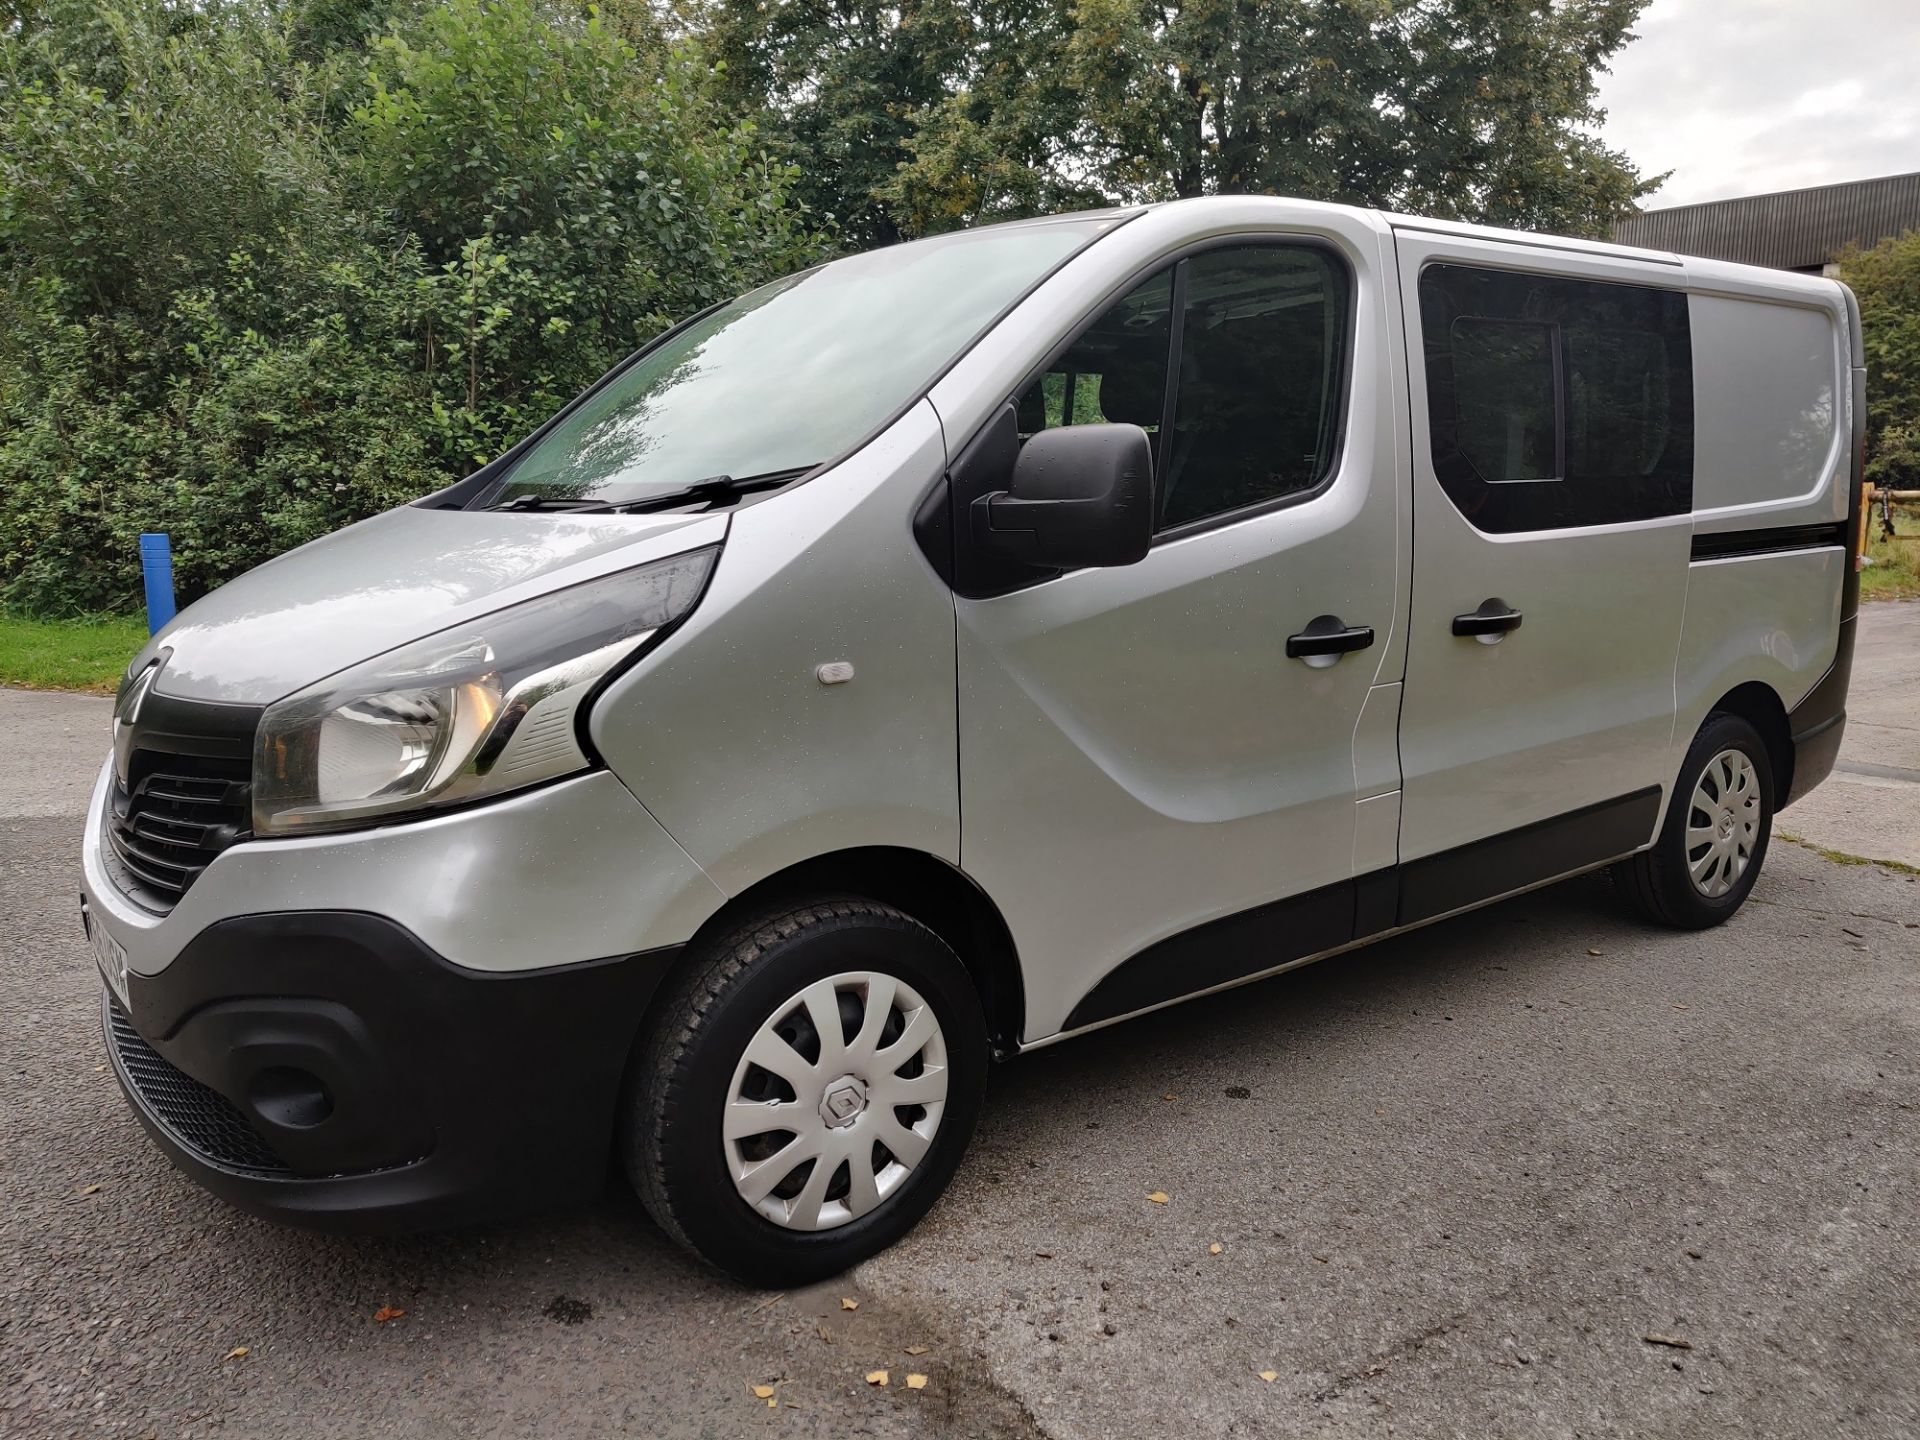 2016/66 REG RENAULT TRAFIC SL27 BUSINESS DCI 1.6 DIESEL SILVER MPV - 7 SEATER *NO VAT* - Image 3 of 16